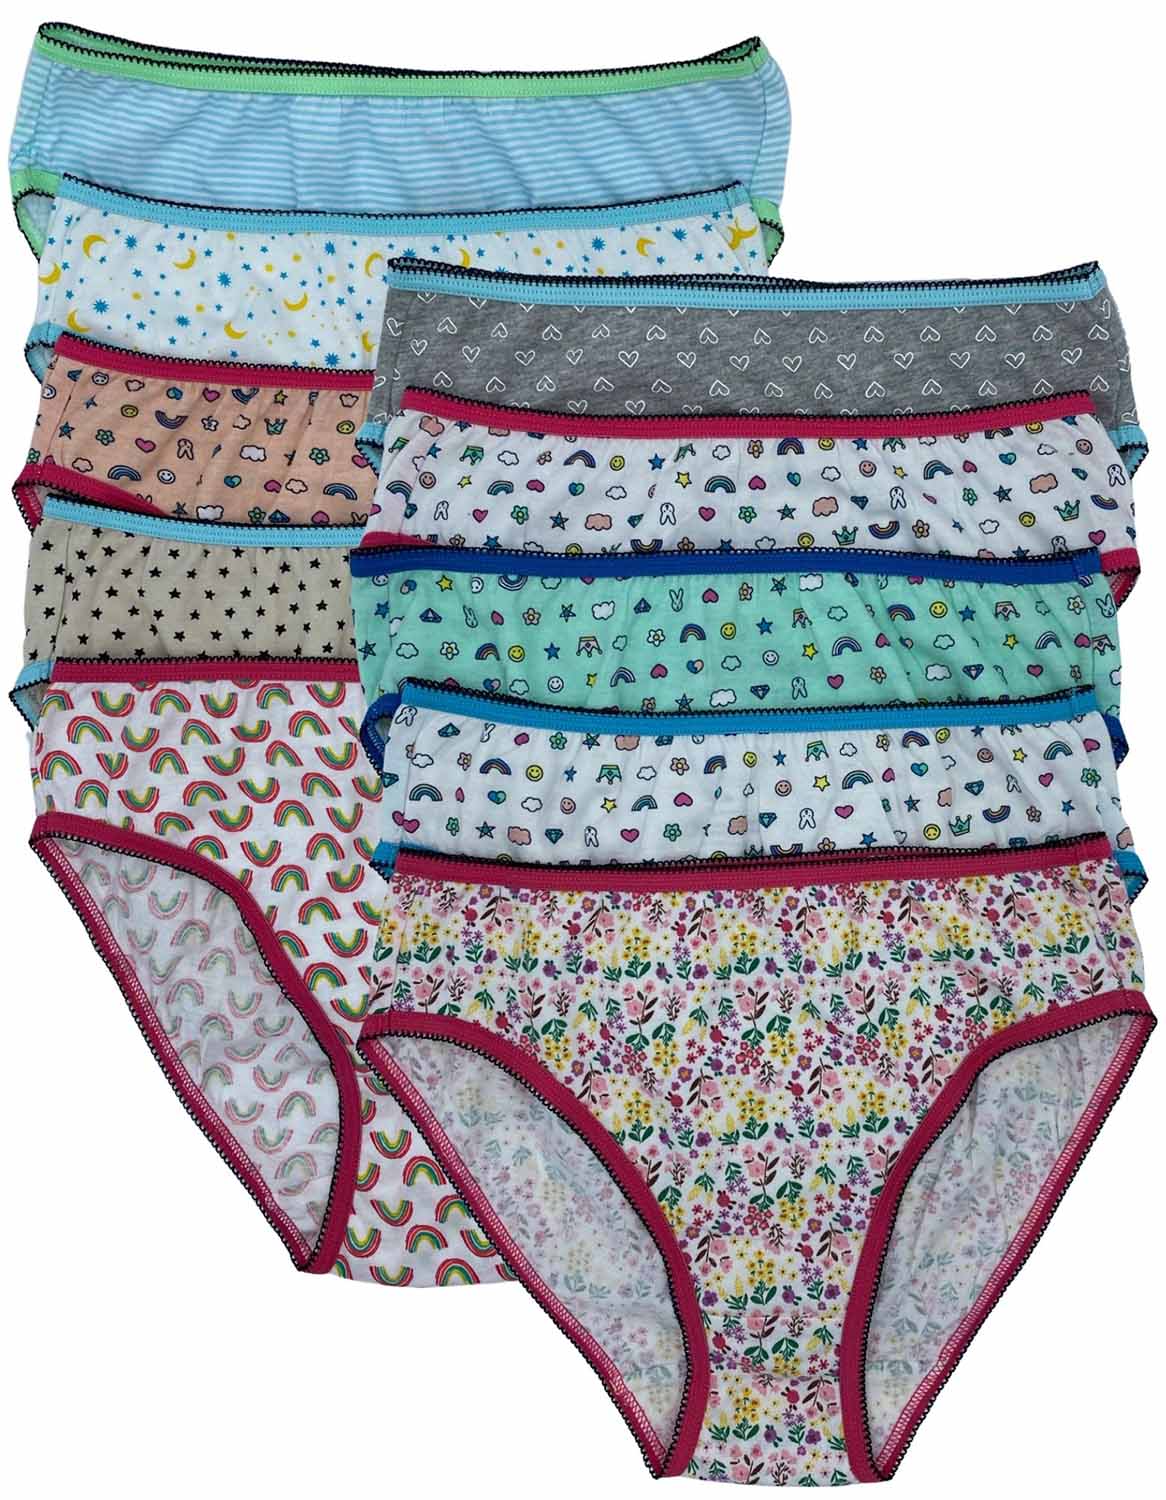 Cotton Hi-Cut Underwear for Girls in Assorted Colors